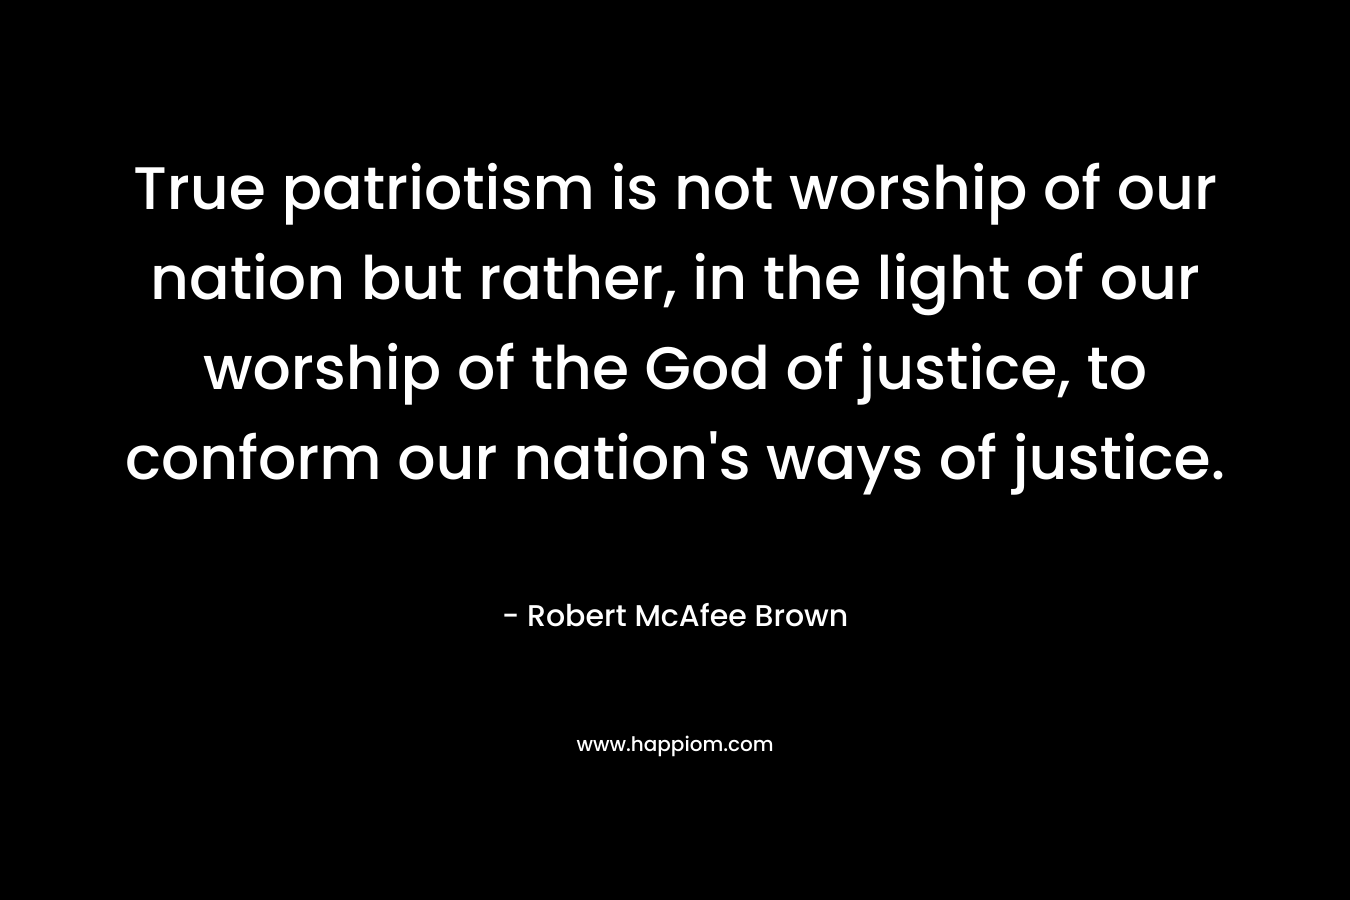 True patriotism is not worship of our nation but rather, in the light of our worship of the God of justice, to conform our nation's ways of justice.